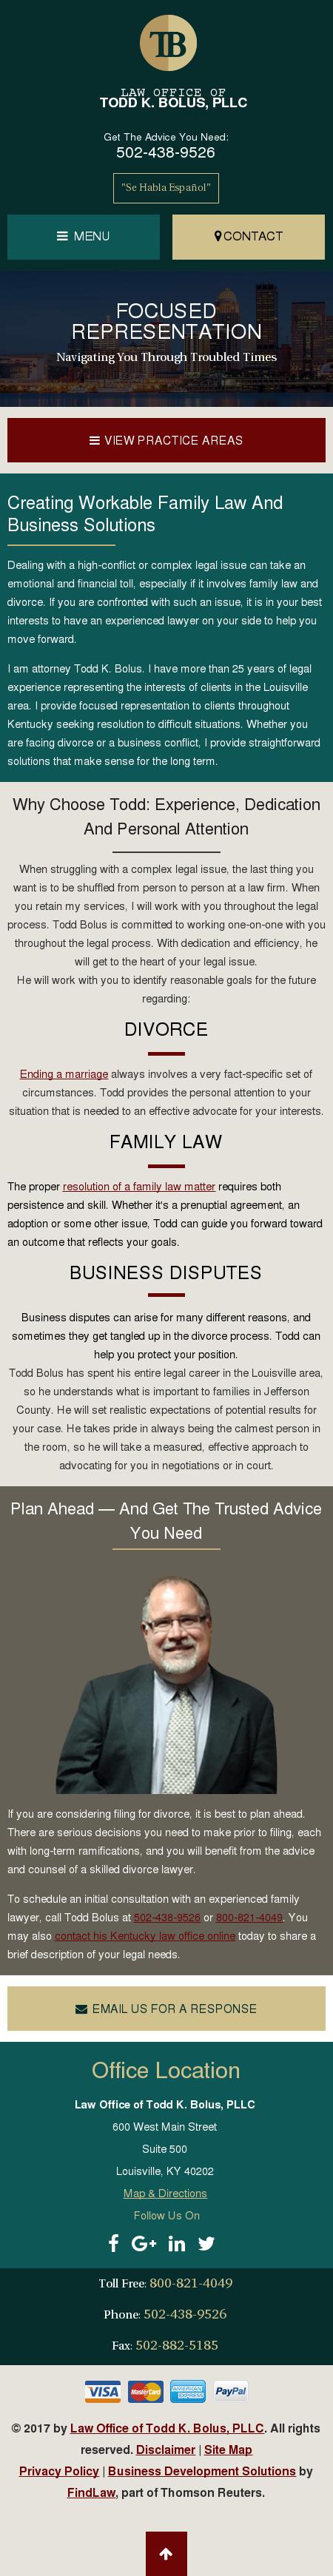 Law Office of Todd K. Bolus, PLLC - Louisville KY Lawyers